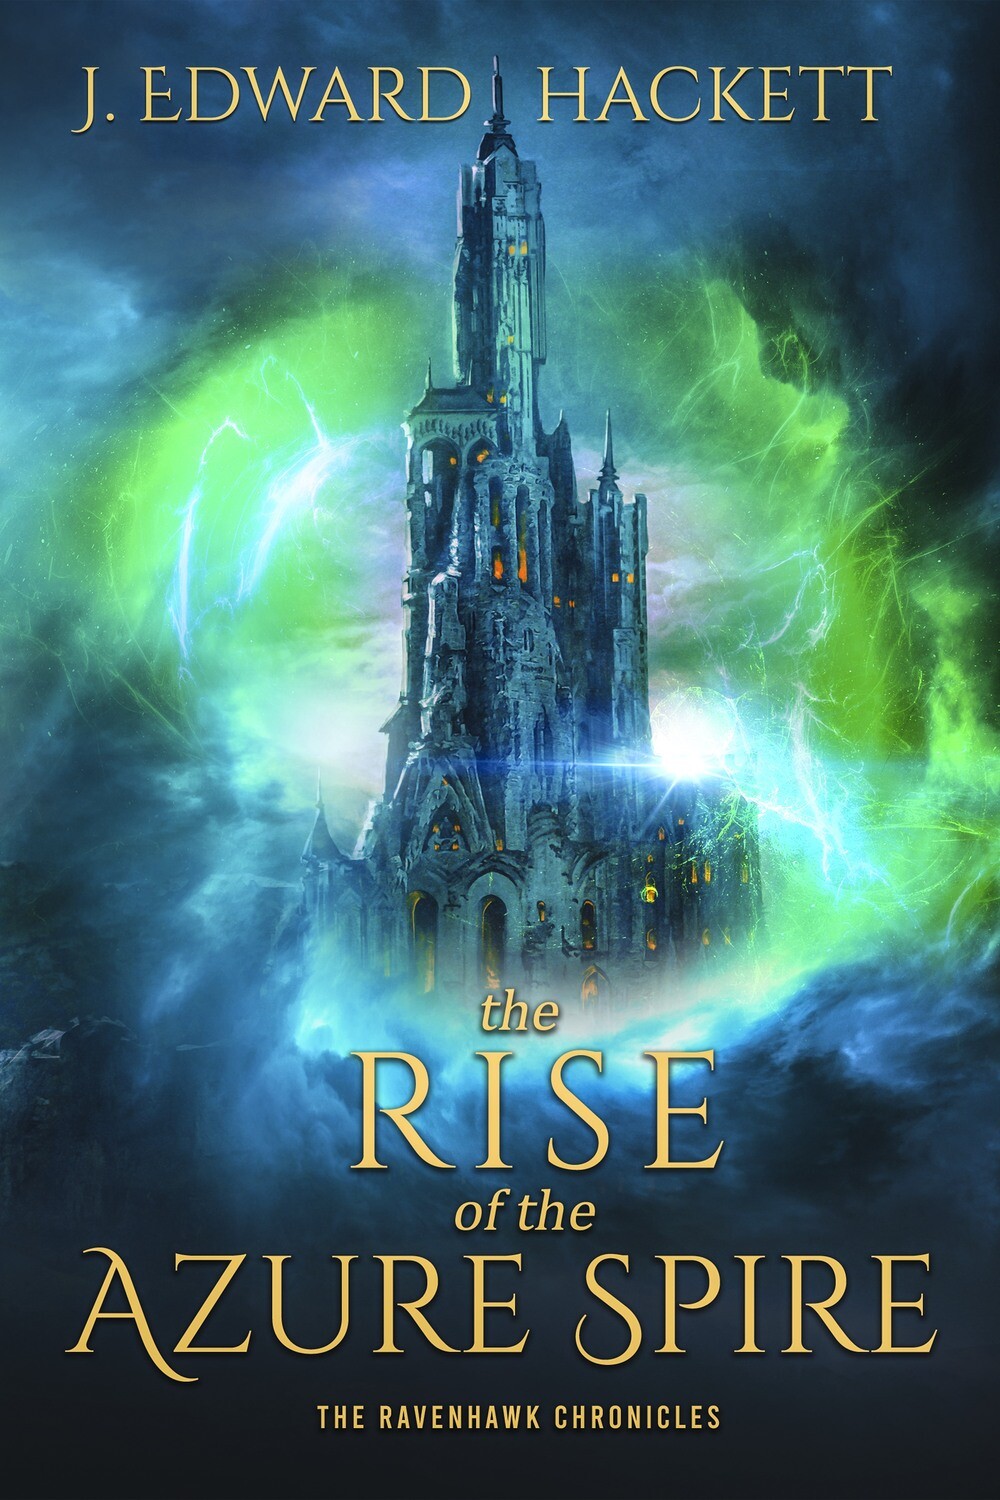 The Rise of the Azure Spire (Book 2, The Ravenhawk Chronicles)